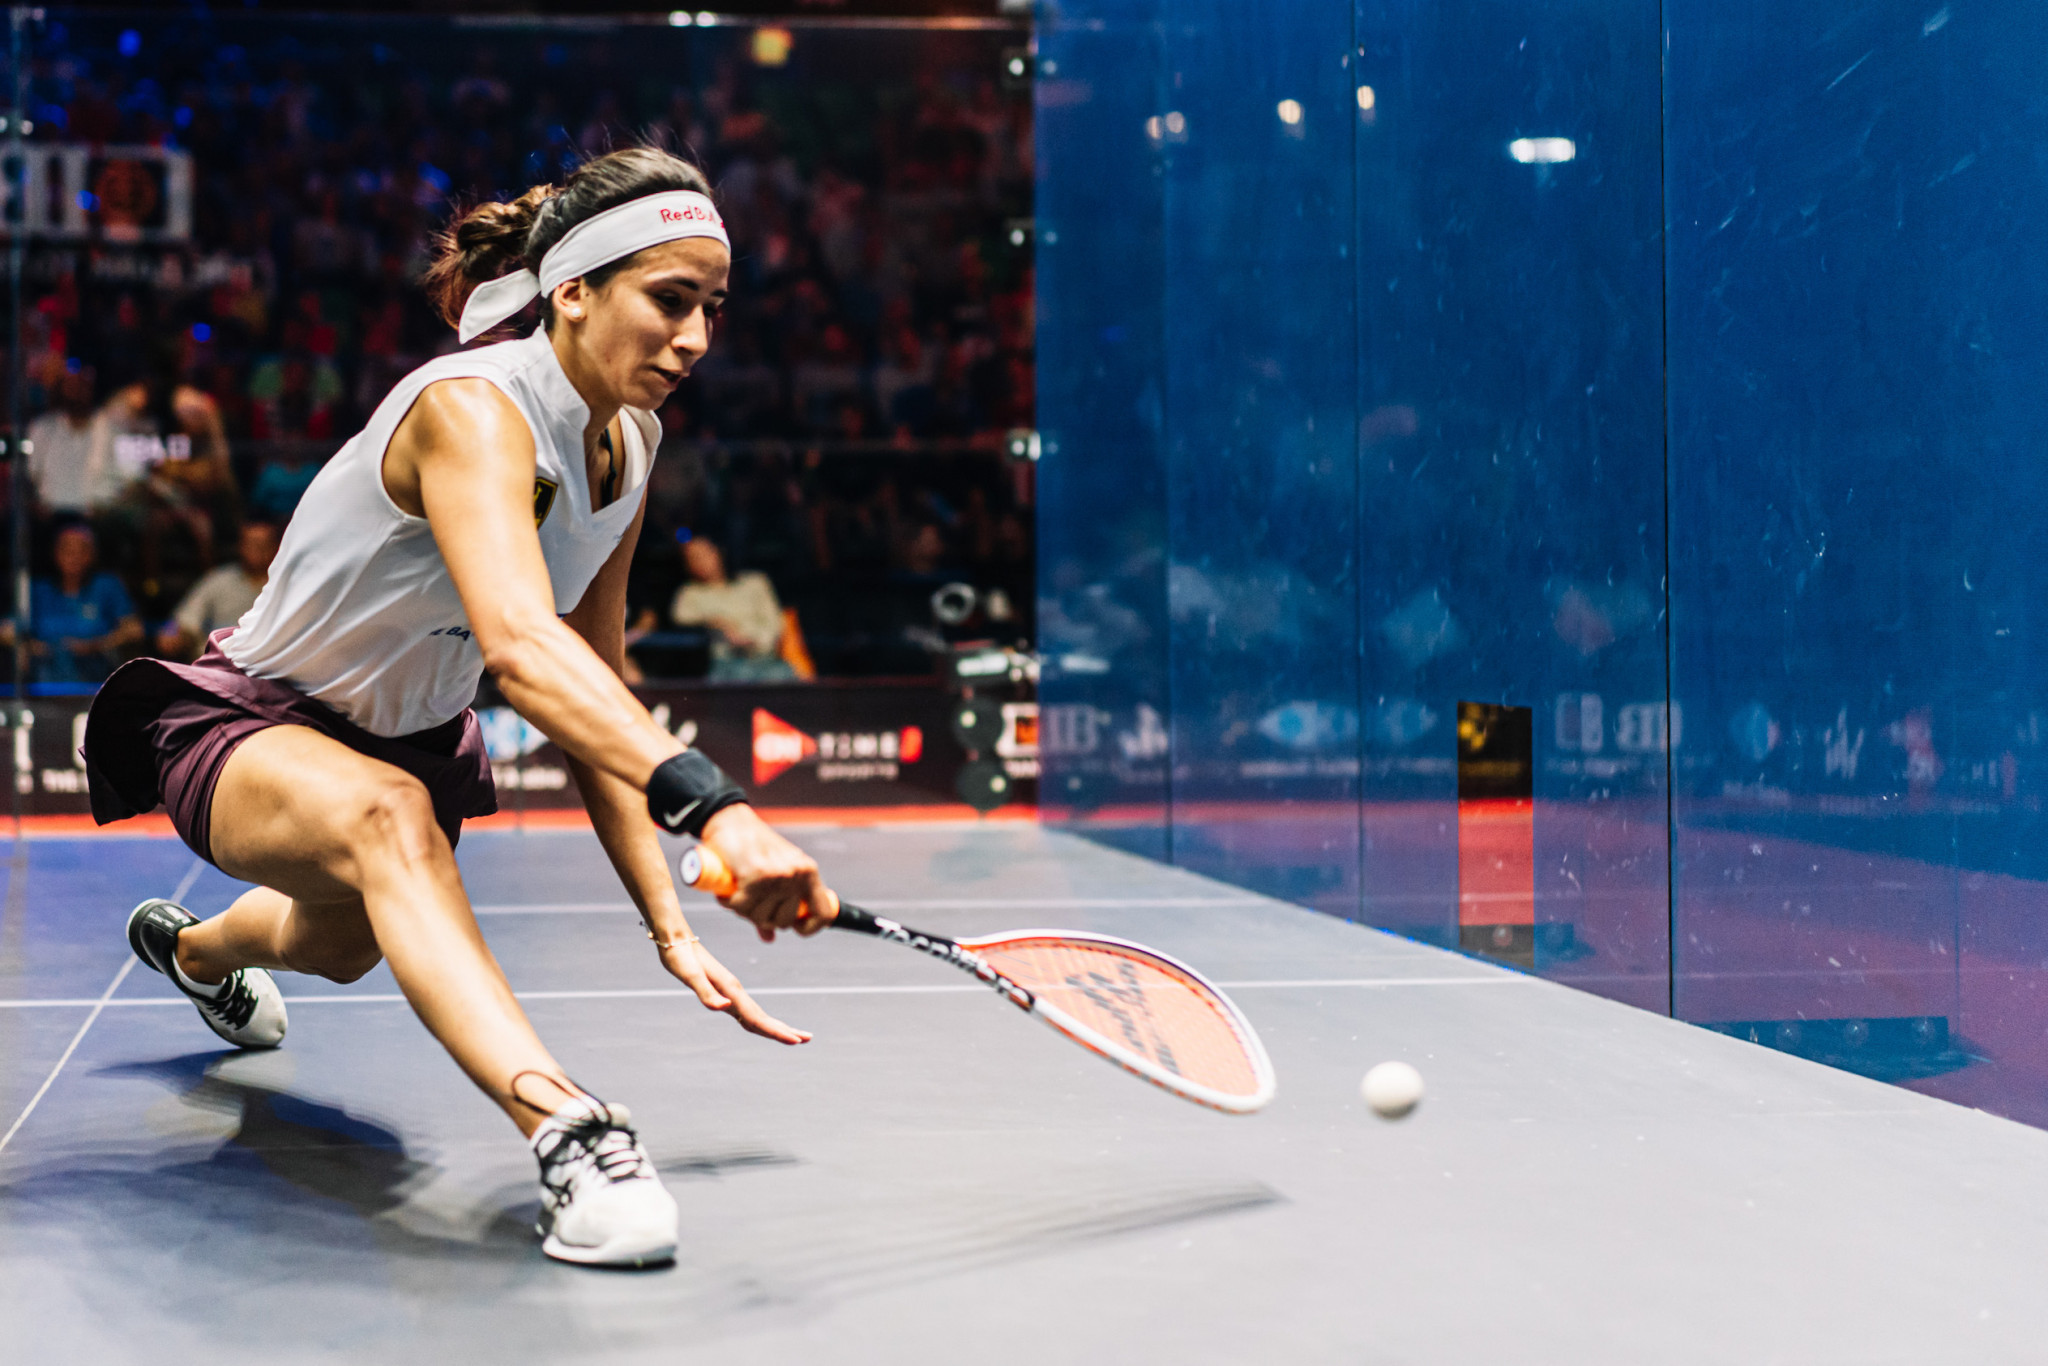 Top seeds Gohar and Farag among winners as semi-final line-ups confirmed for World Tour Squash Finals